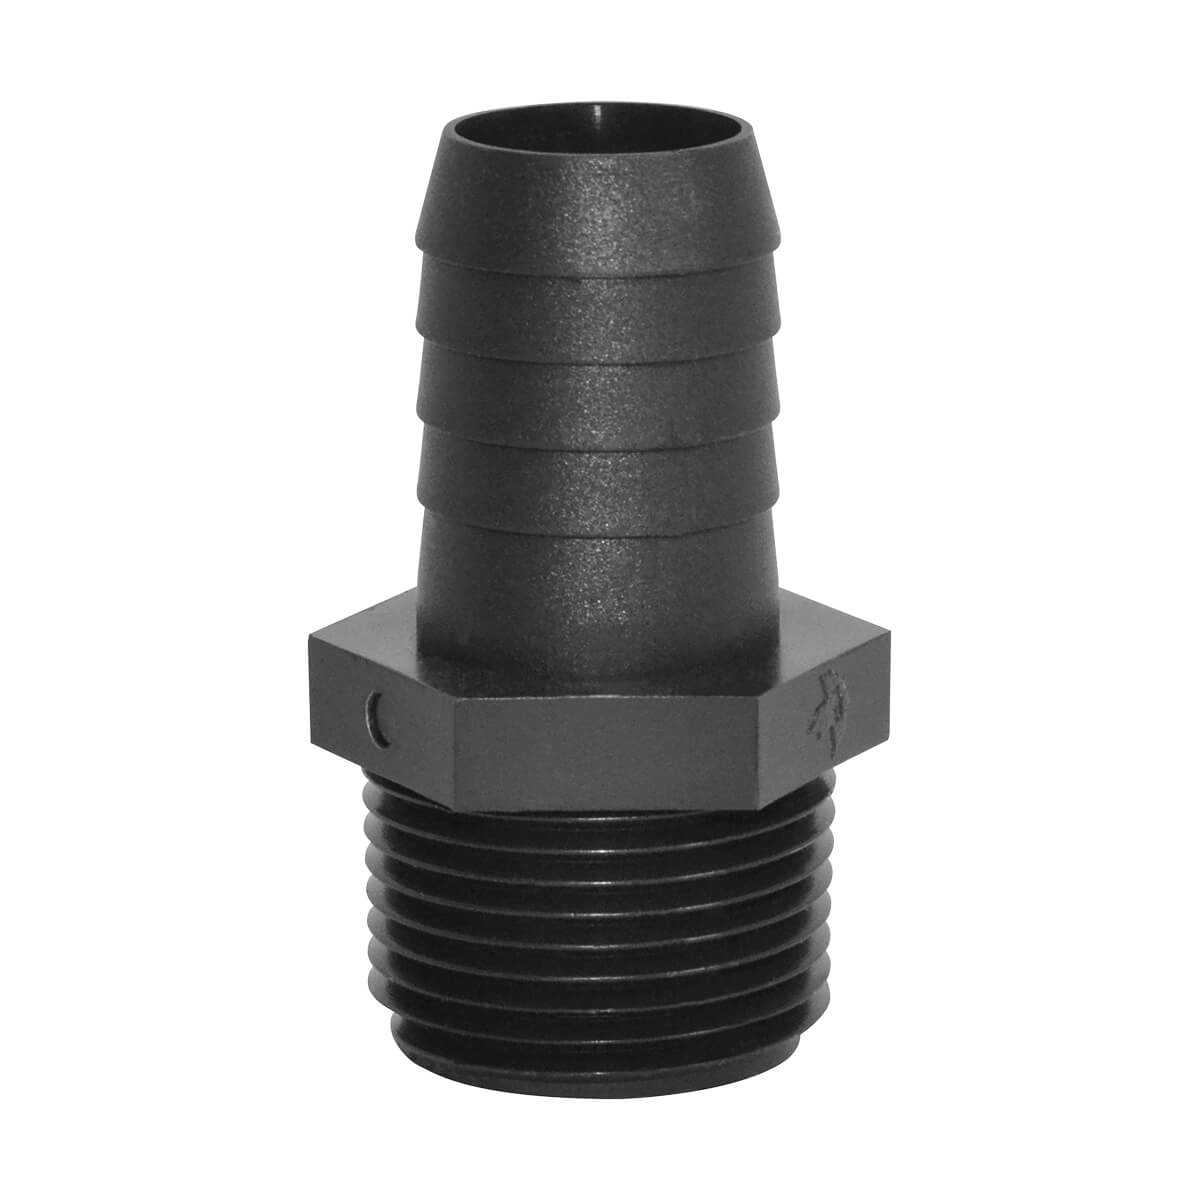 Adapter 1/2-in Male NPT x 3/8-in Hose Barb